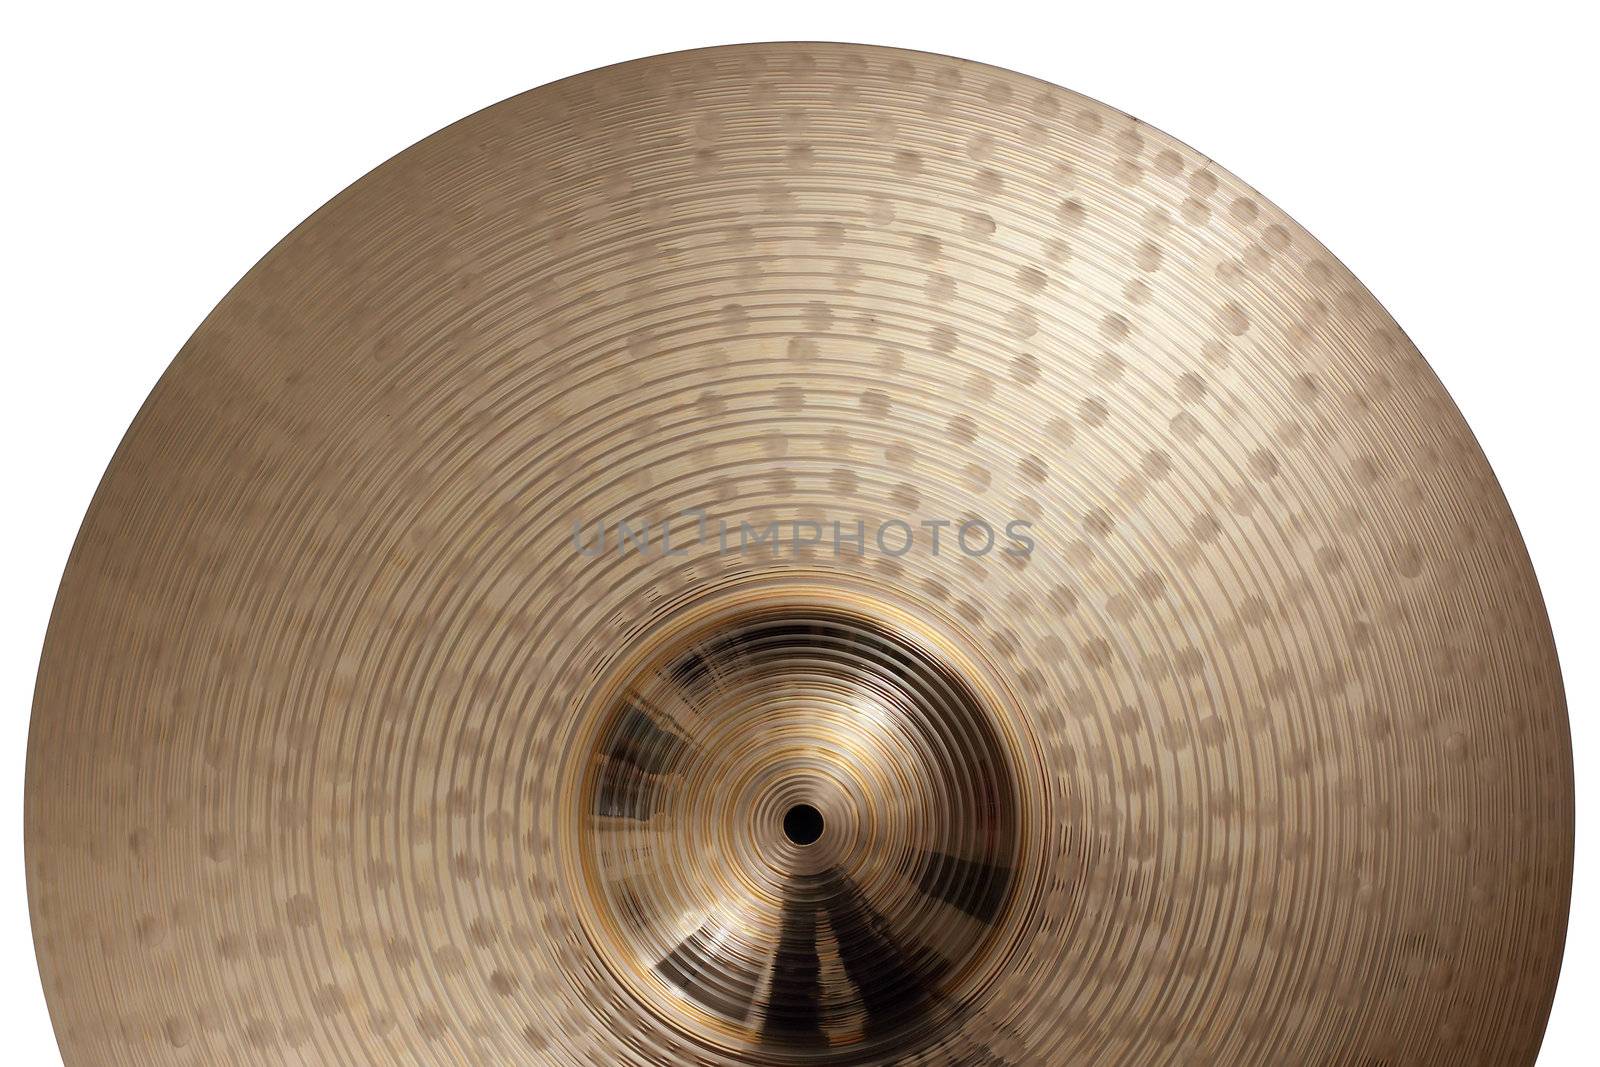 Ride cymbal background by sumners